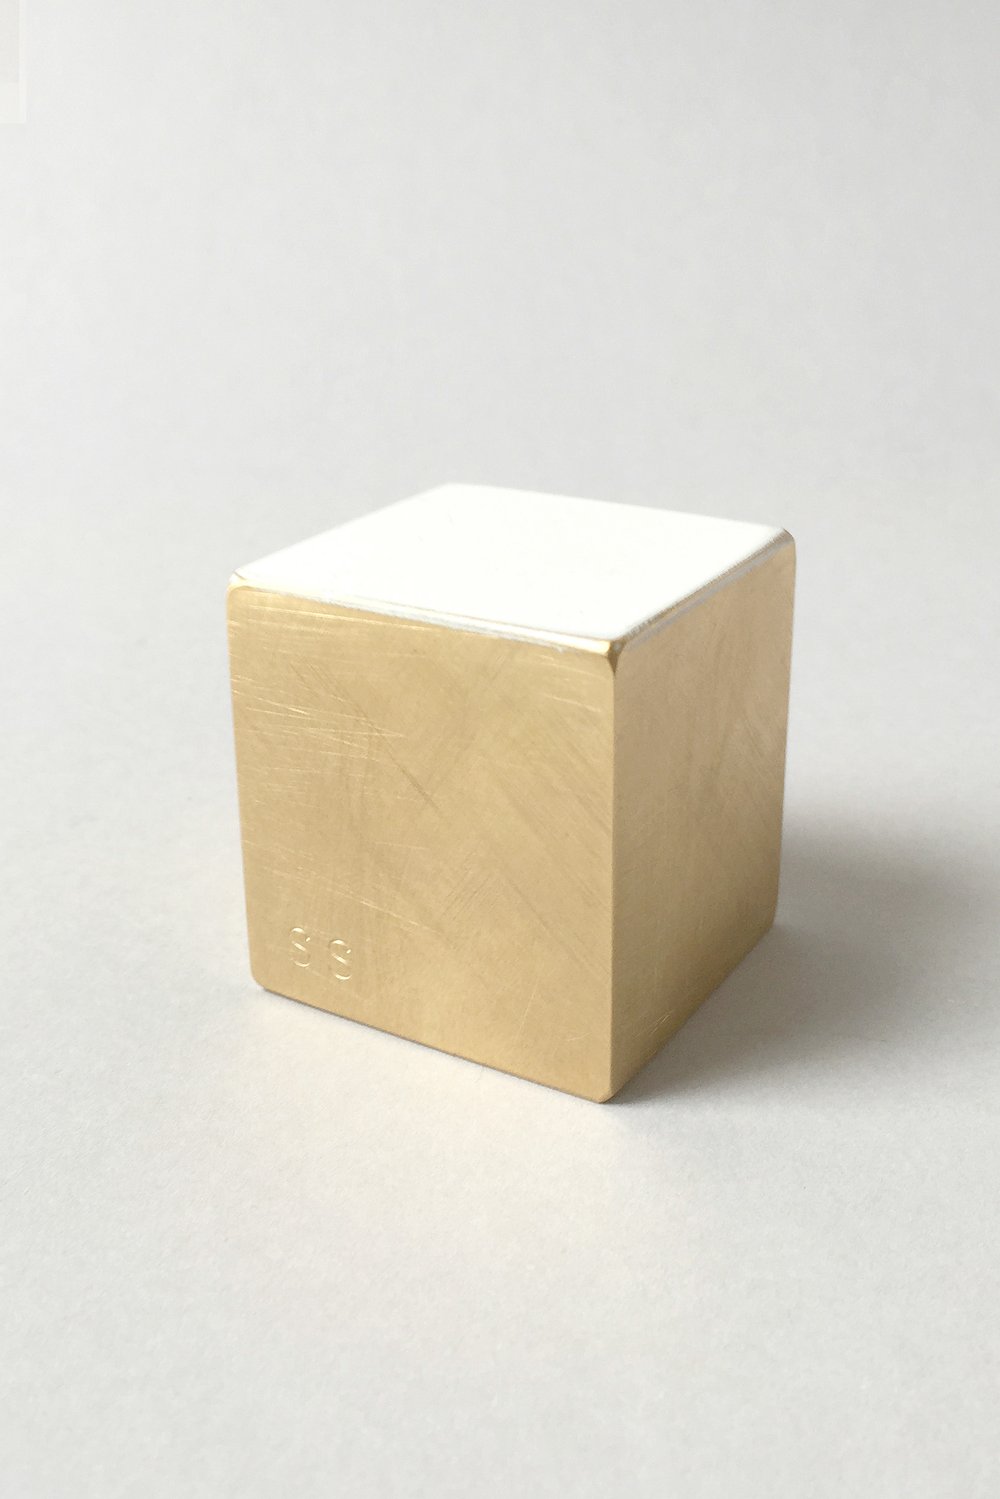 Image of Float paperweight - Square